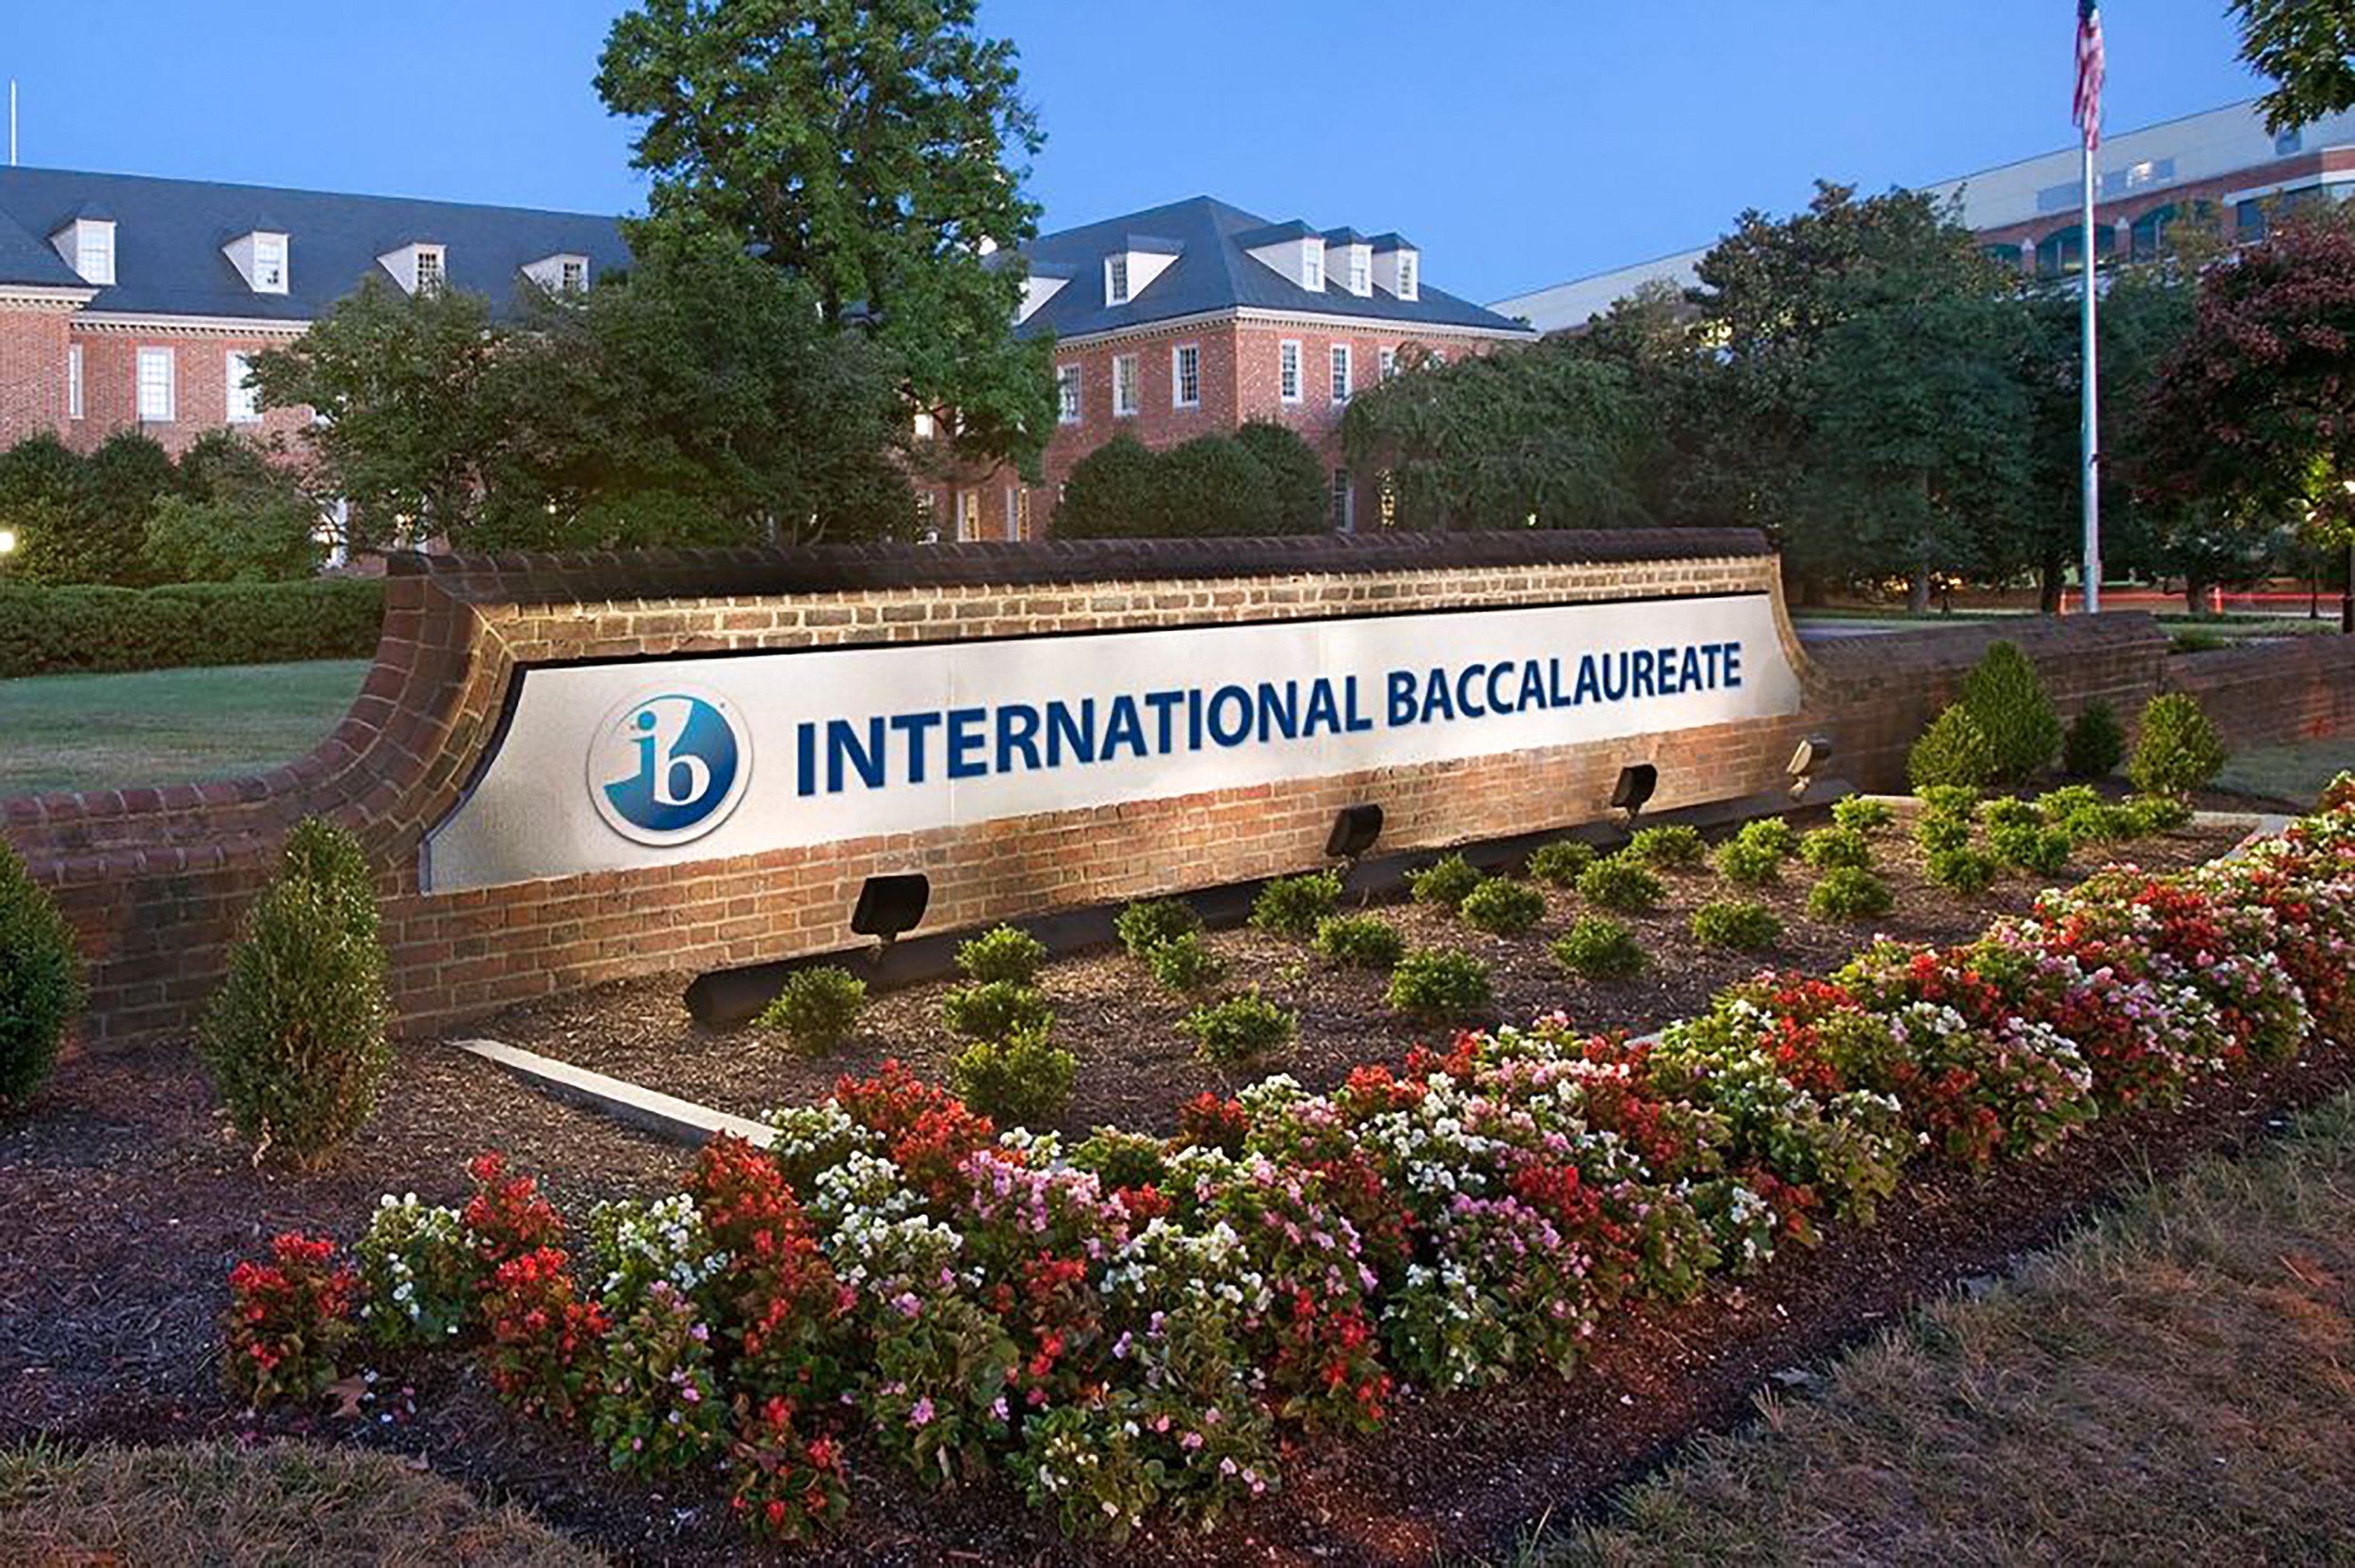 Hackers have breached the computer systems of the International Baccalaureate authority in a bid to ‘cancel’ the exams. Photo: Handout